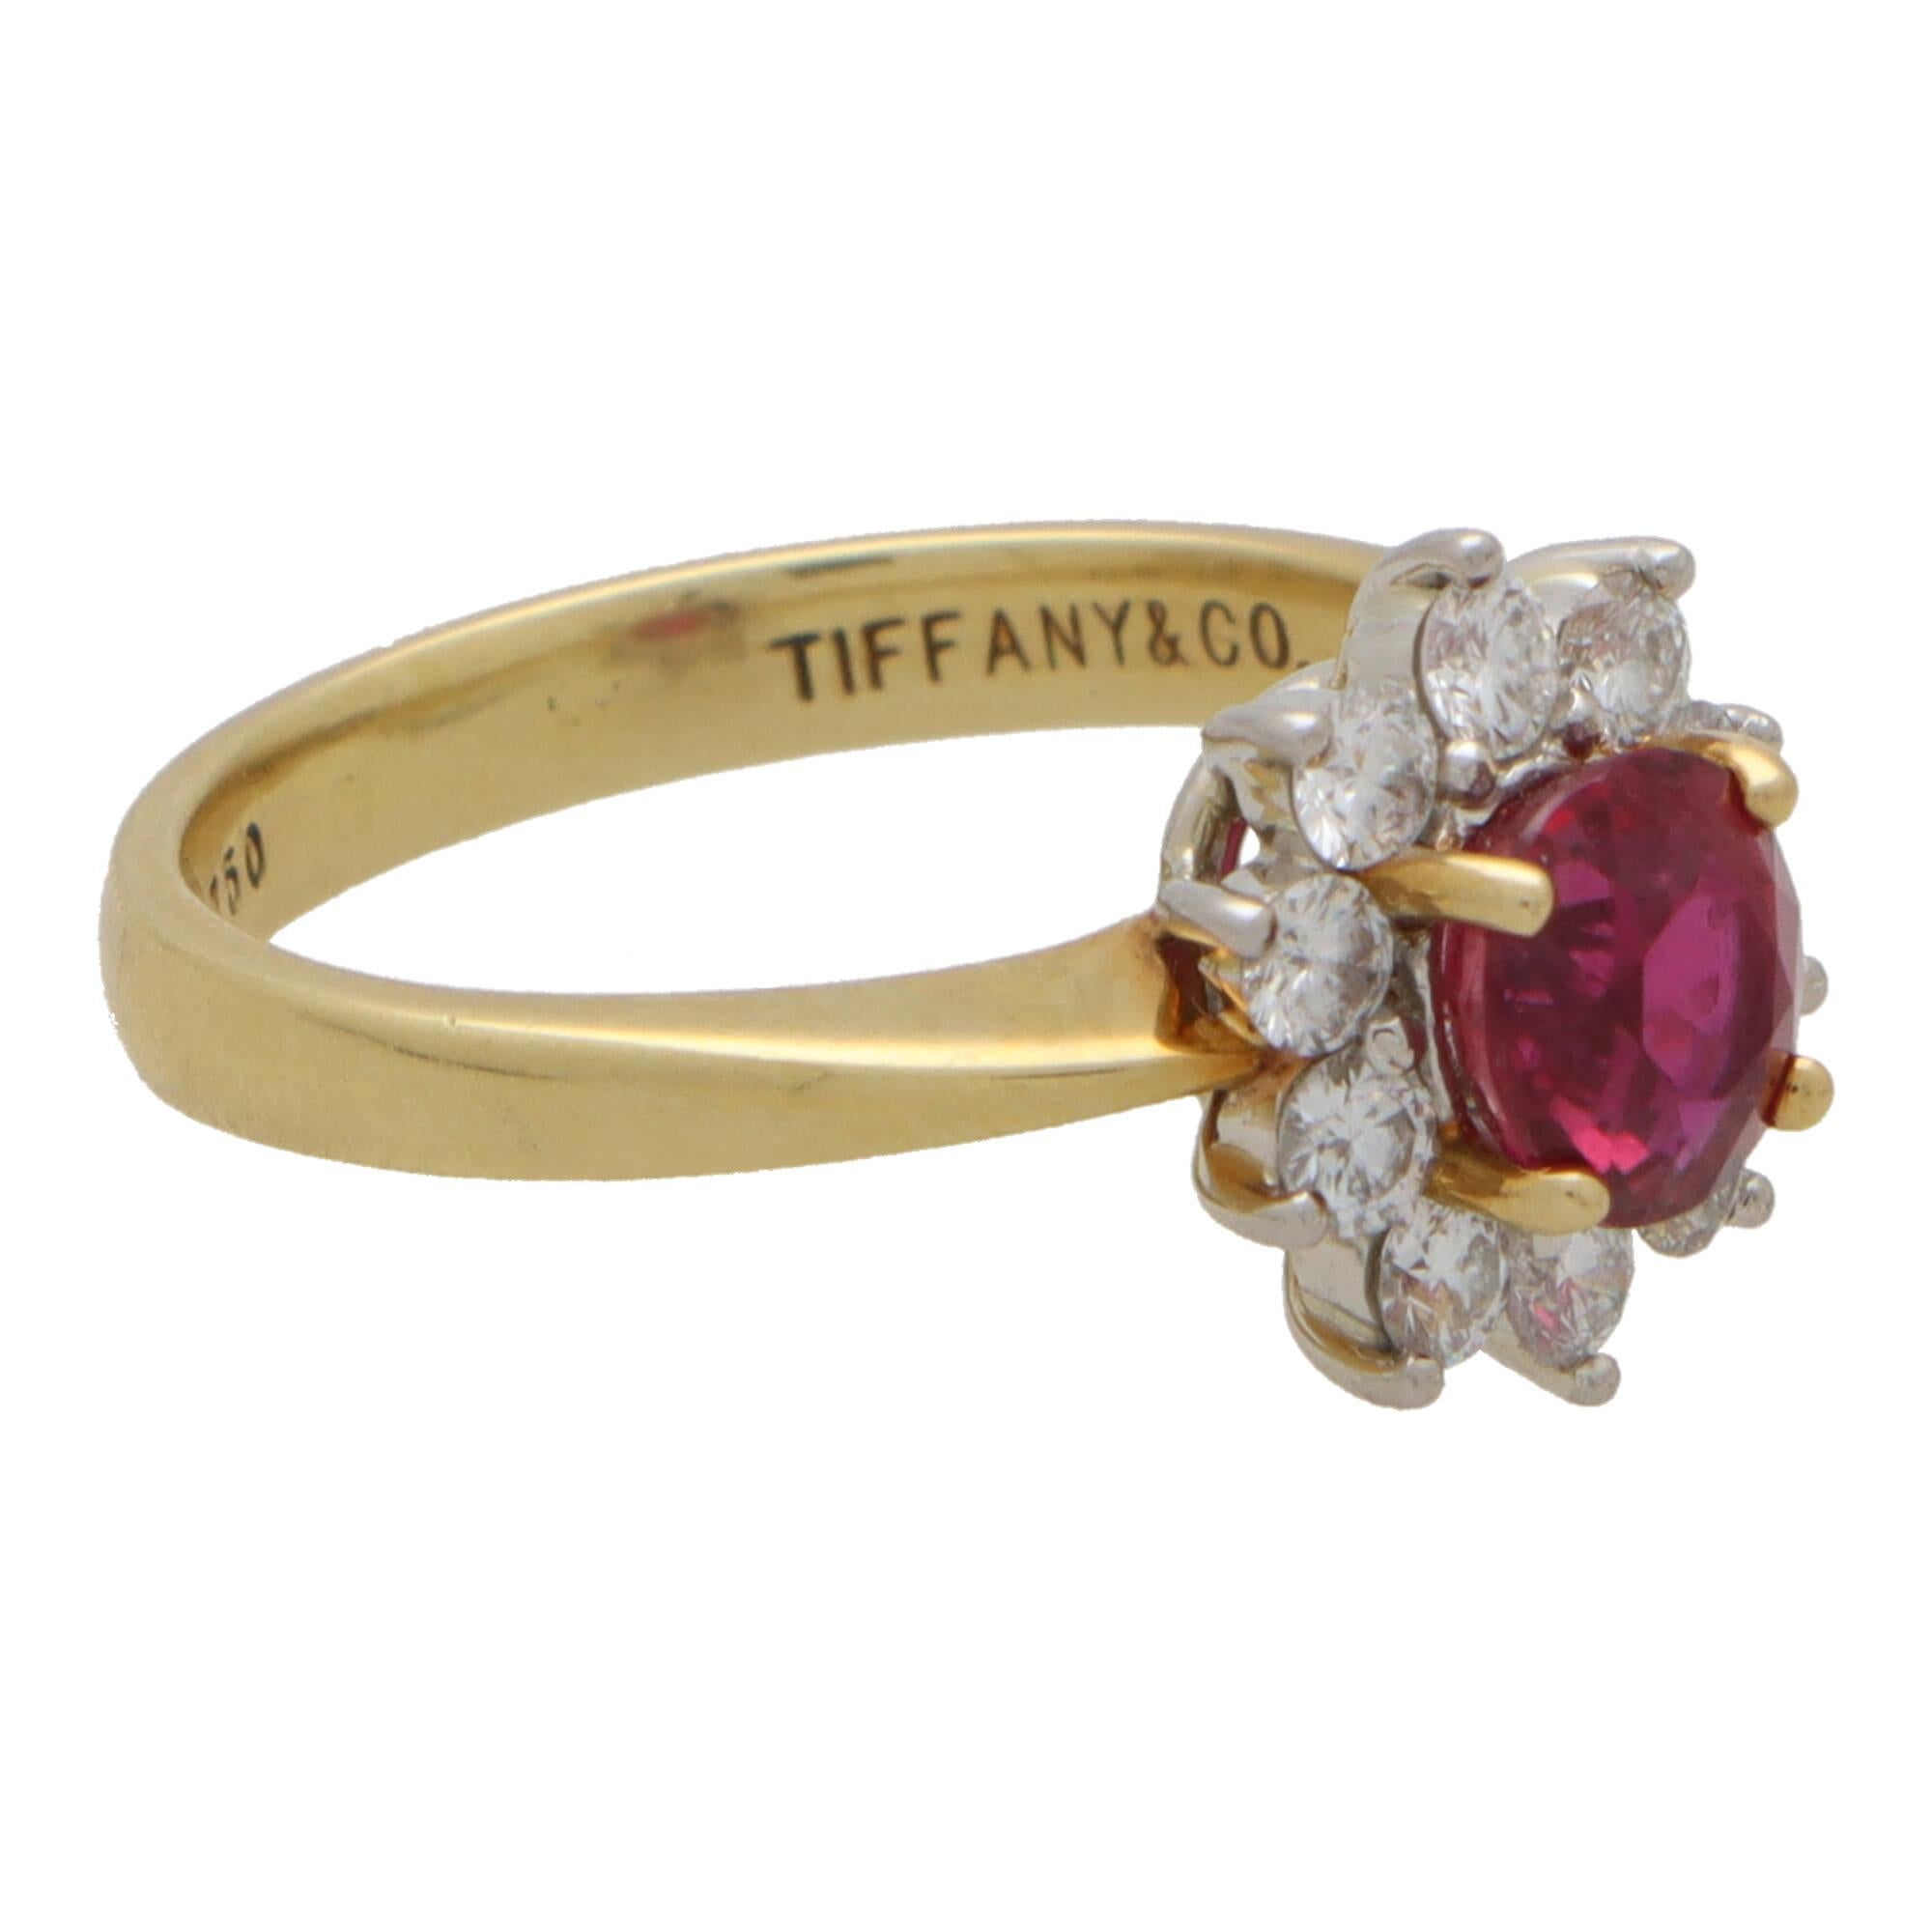 A beautiful vintage Tiffany & Co. ruby and diamond cluster ring set in 18k yellow gold and platinum.

The piece is centrally set with a vibrant oval cut ruby which is four-claw set securely. The ruby has a fantastic coloring to it and is surrounded